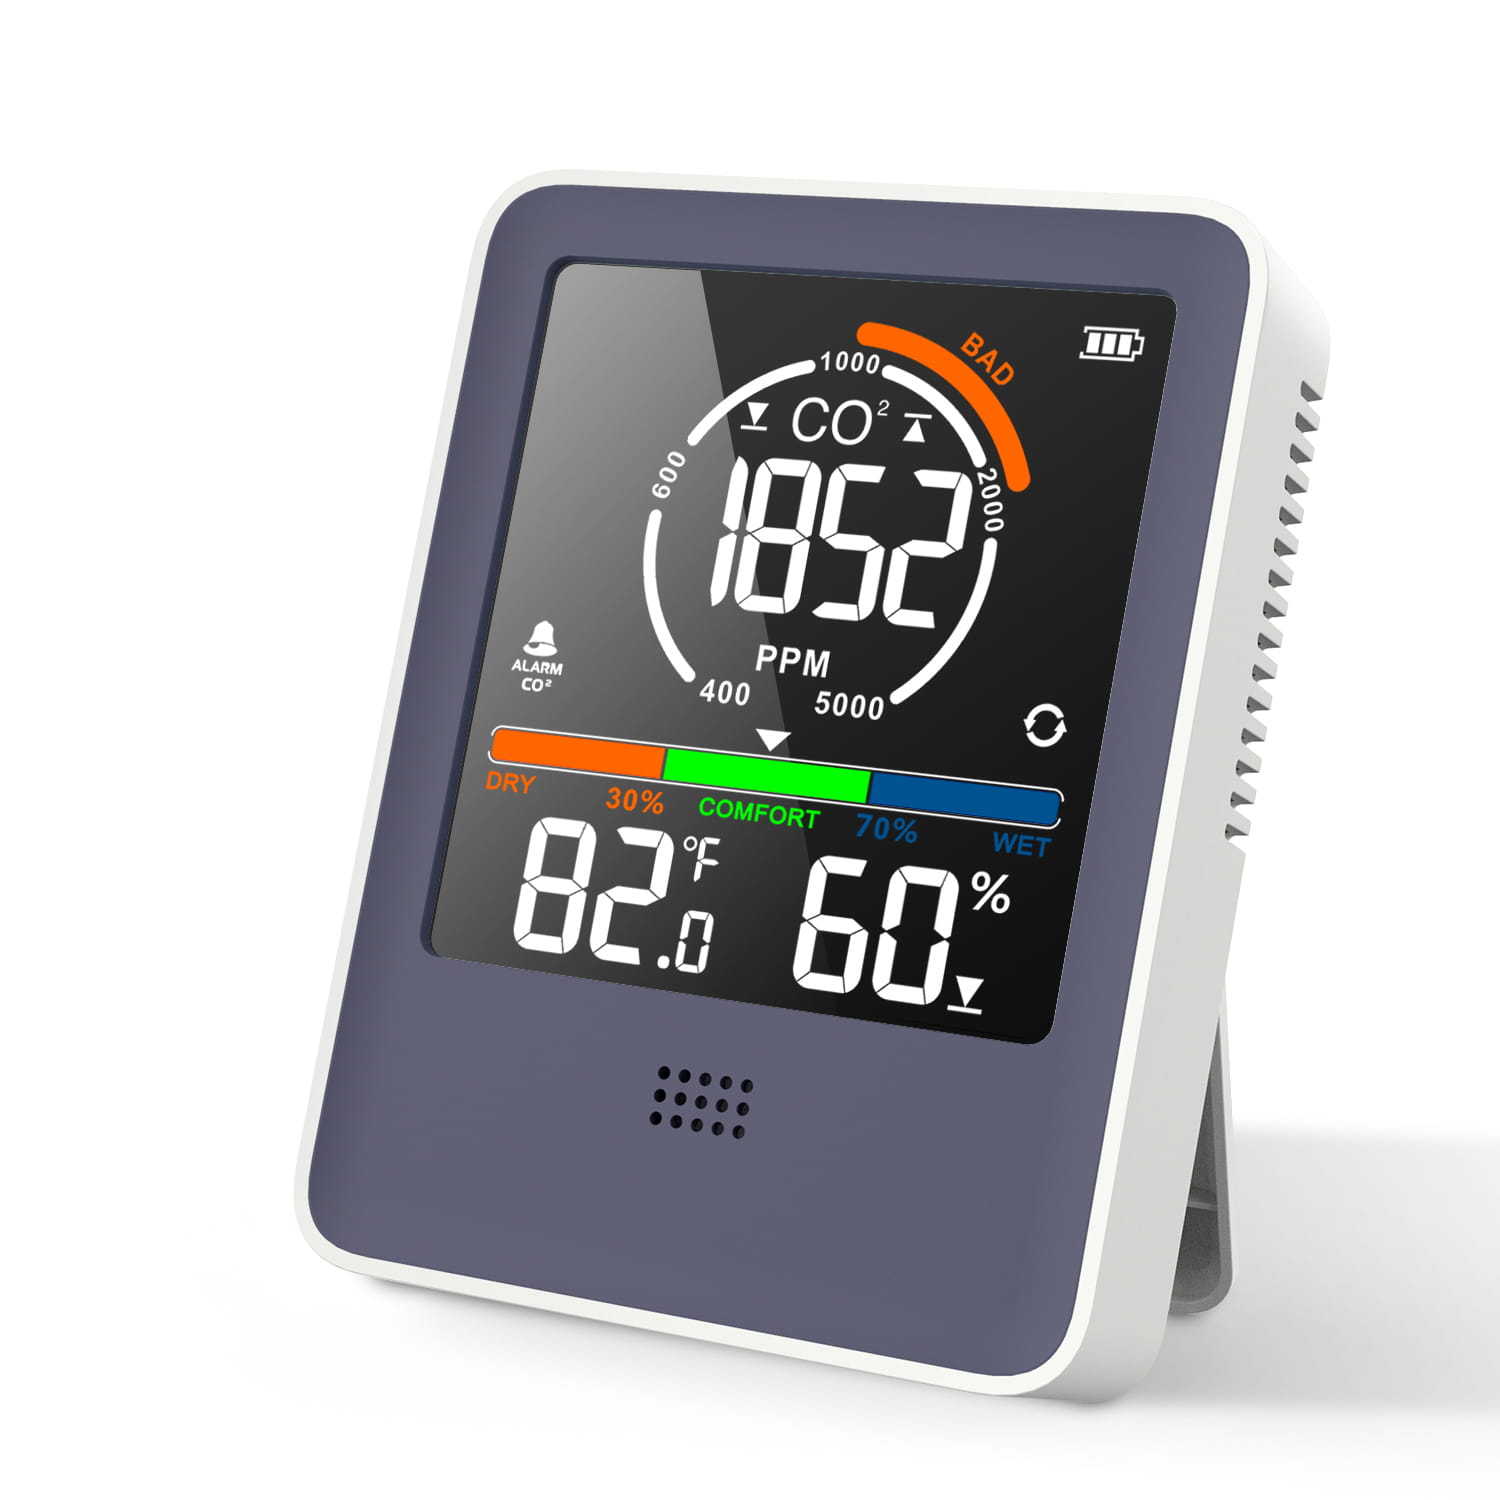 CO2 Monitor| Air Quality Monitor for CO2, CO2 Meter, Temperature, Humidity